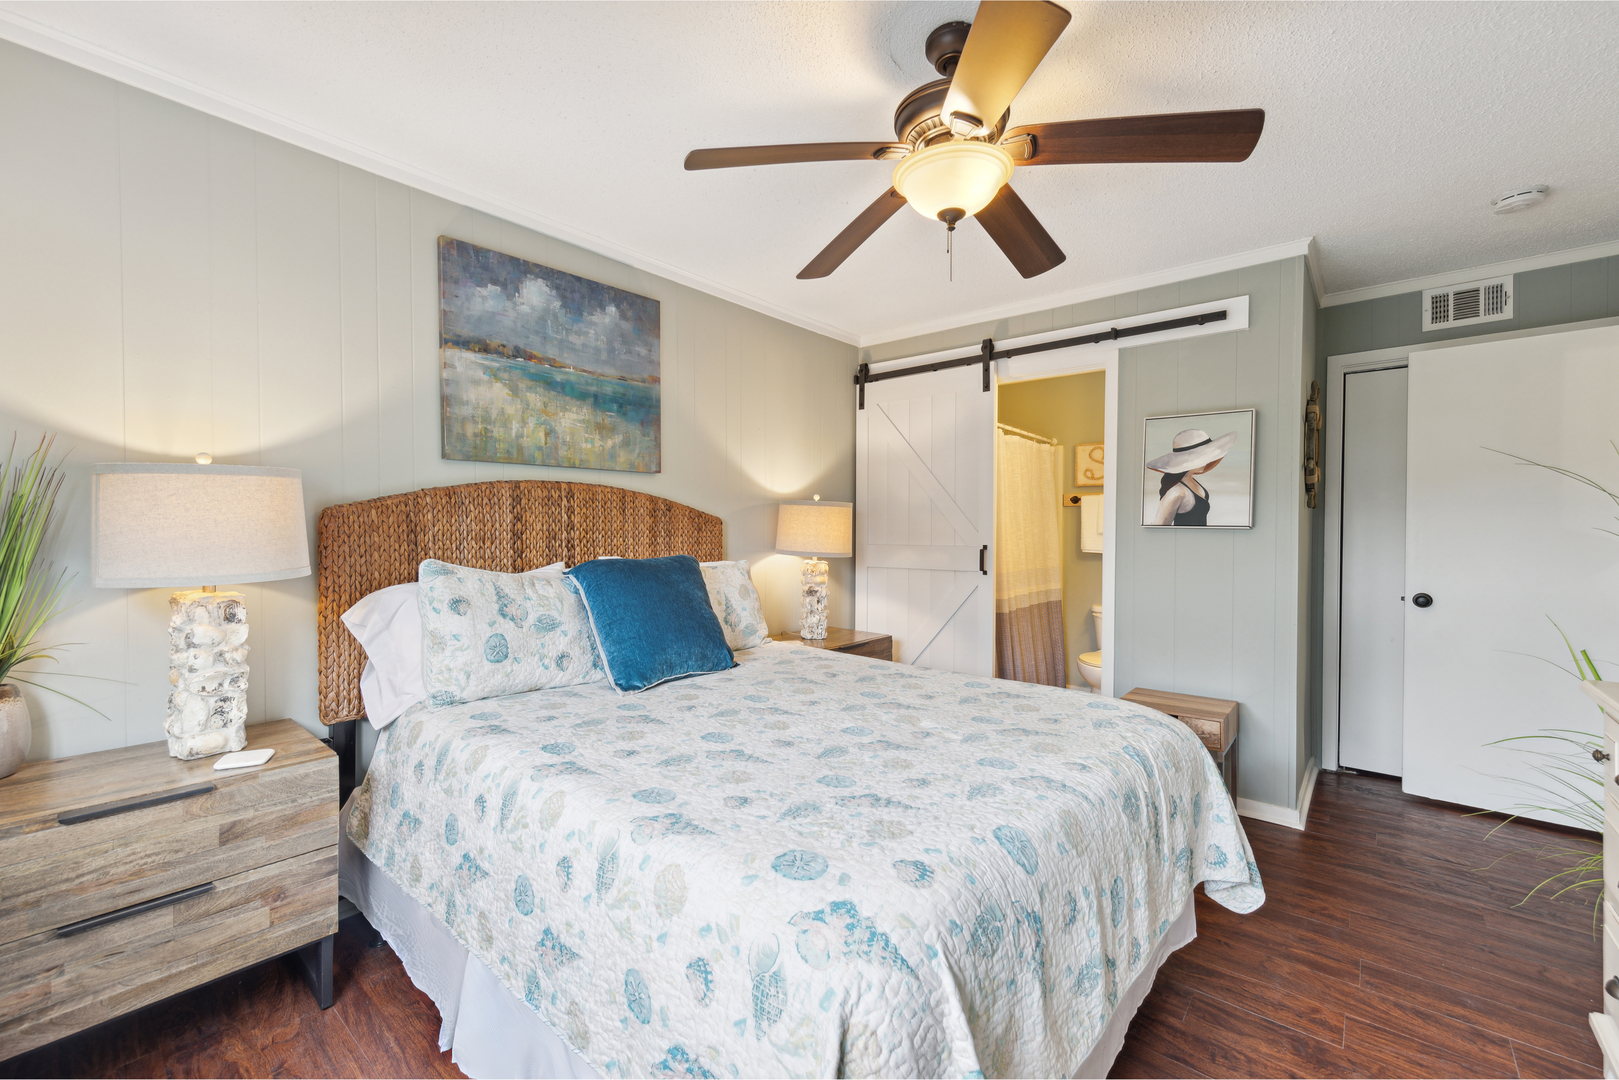 The primary suite offers a queen bed, ensuite bathroom, TV, & ceiling fan